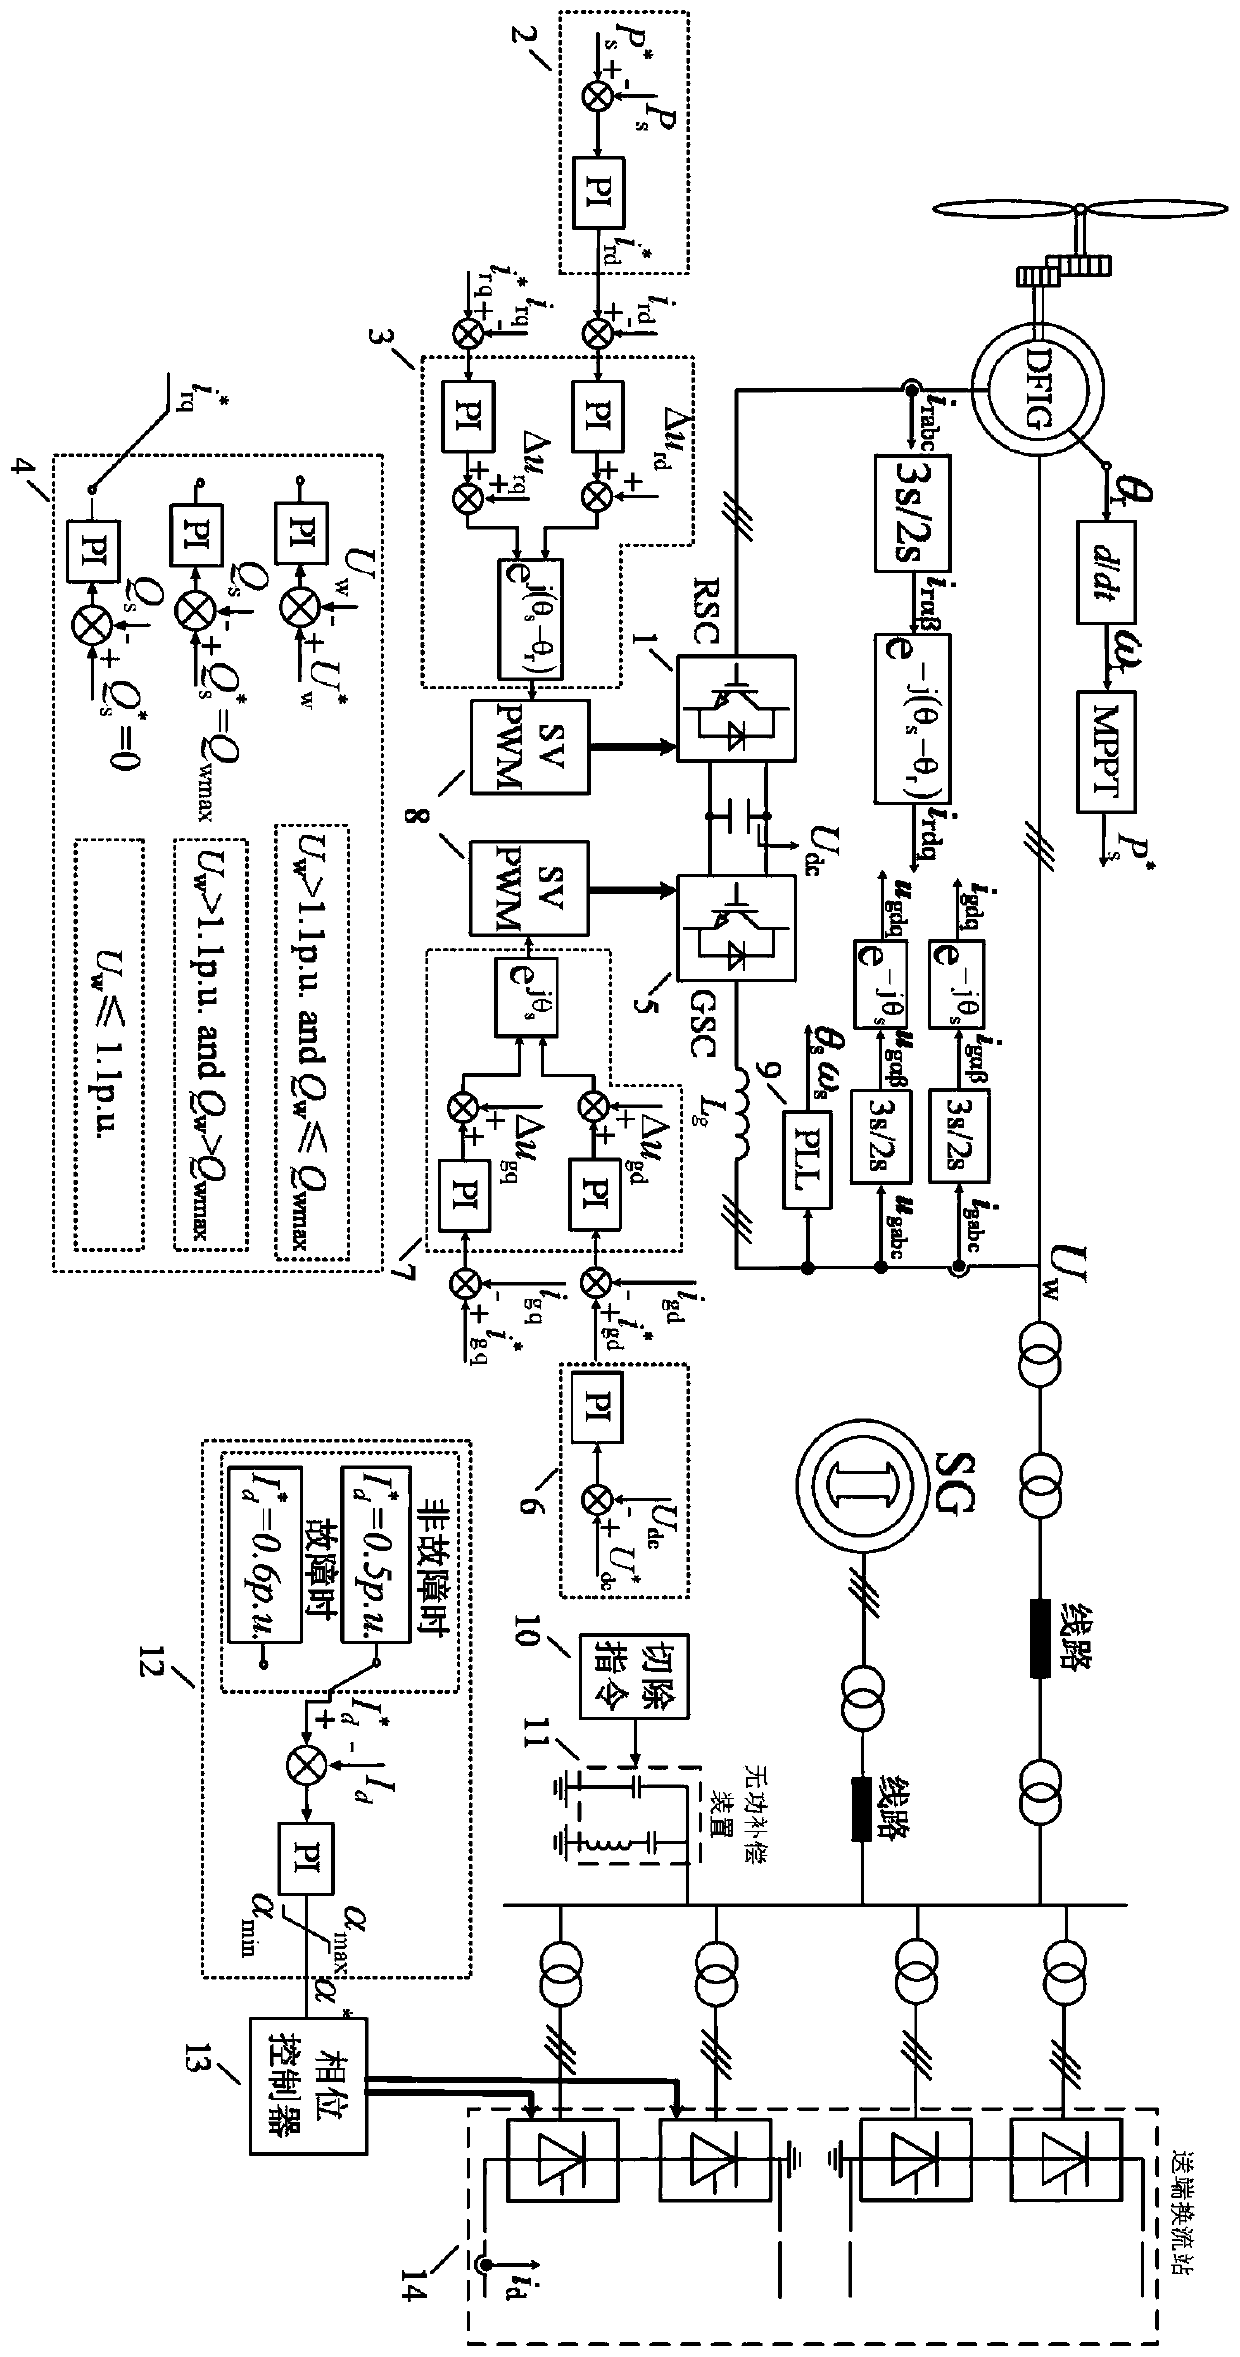 Coordinated control method for wind power DC transmission system under single pole blocking fault